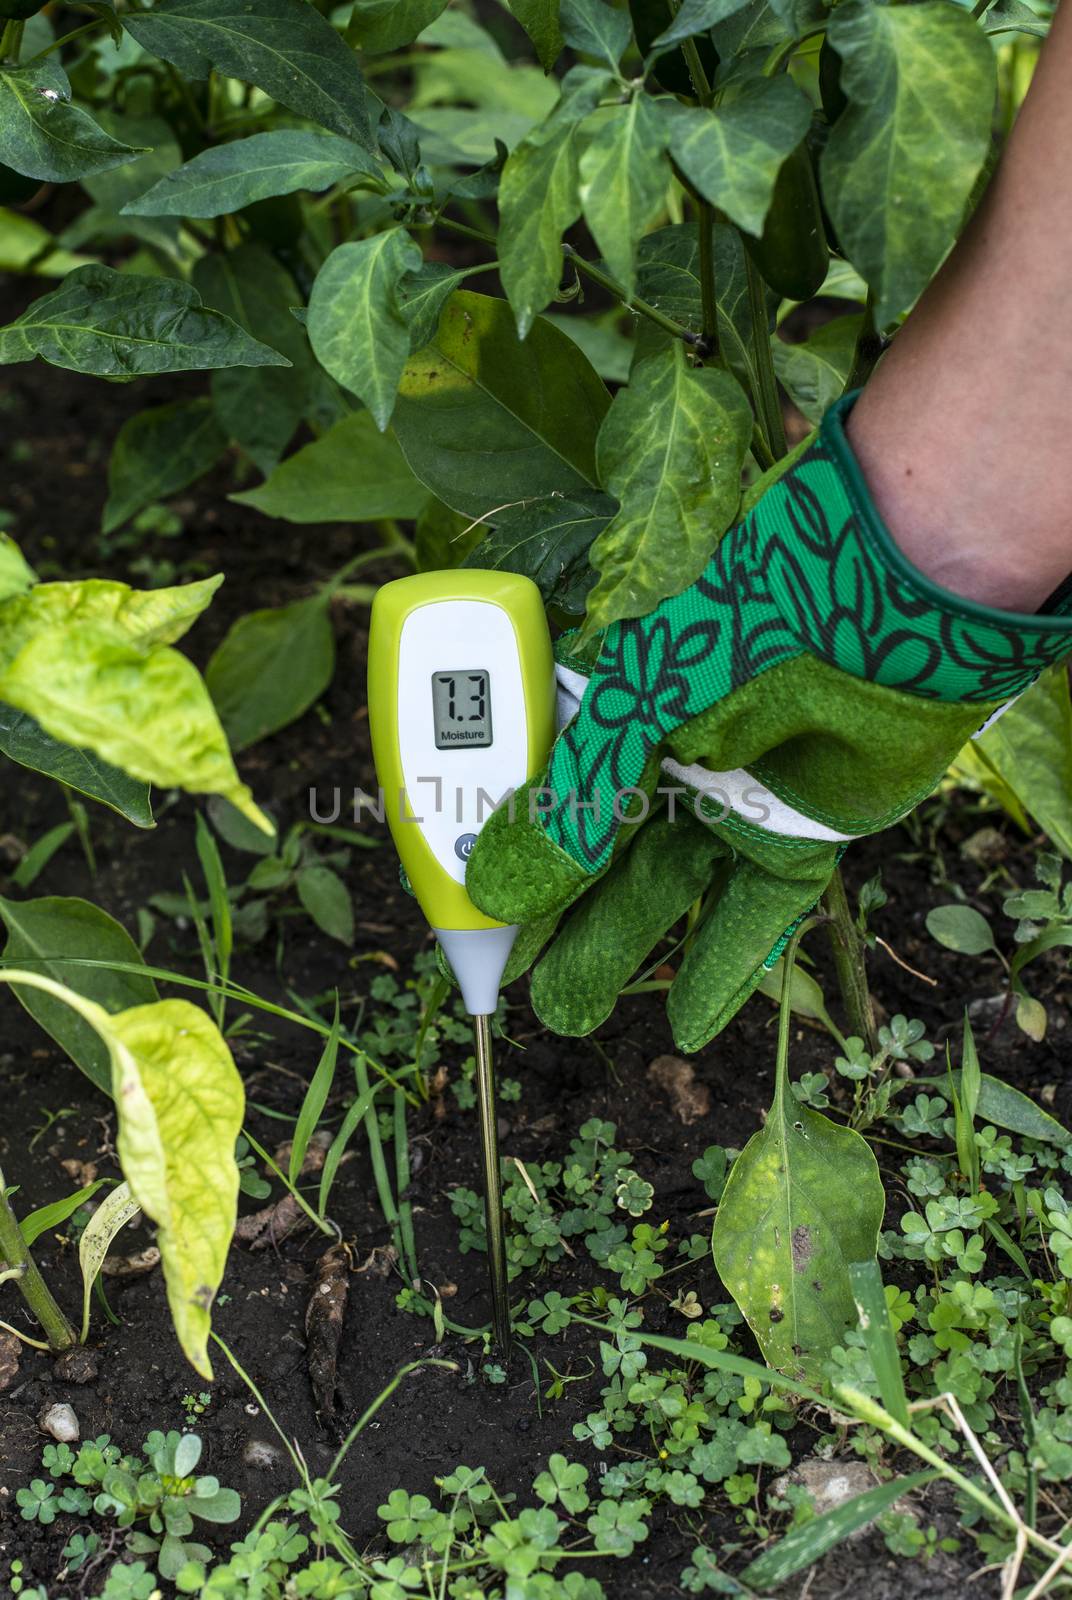 Moisture meter tester in soil. Measure soil for humidity with digital device. Woman farmer in a garden. Concept for new technology in the agriculture.